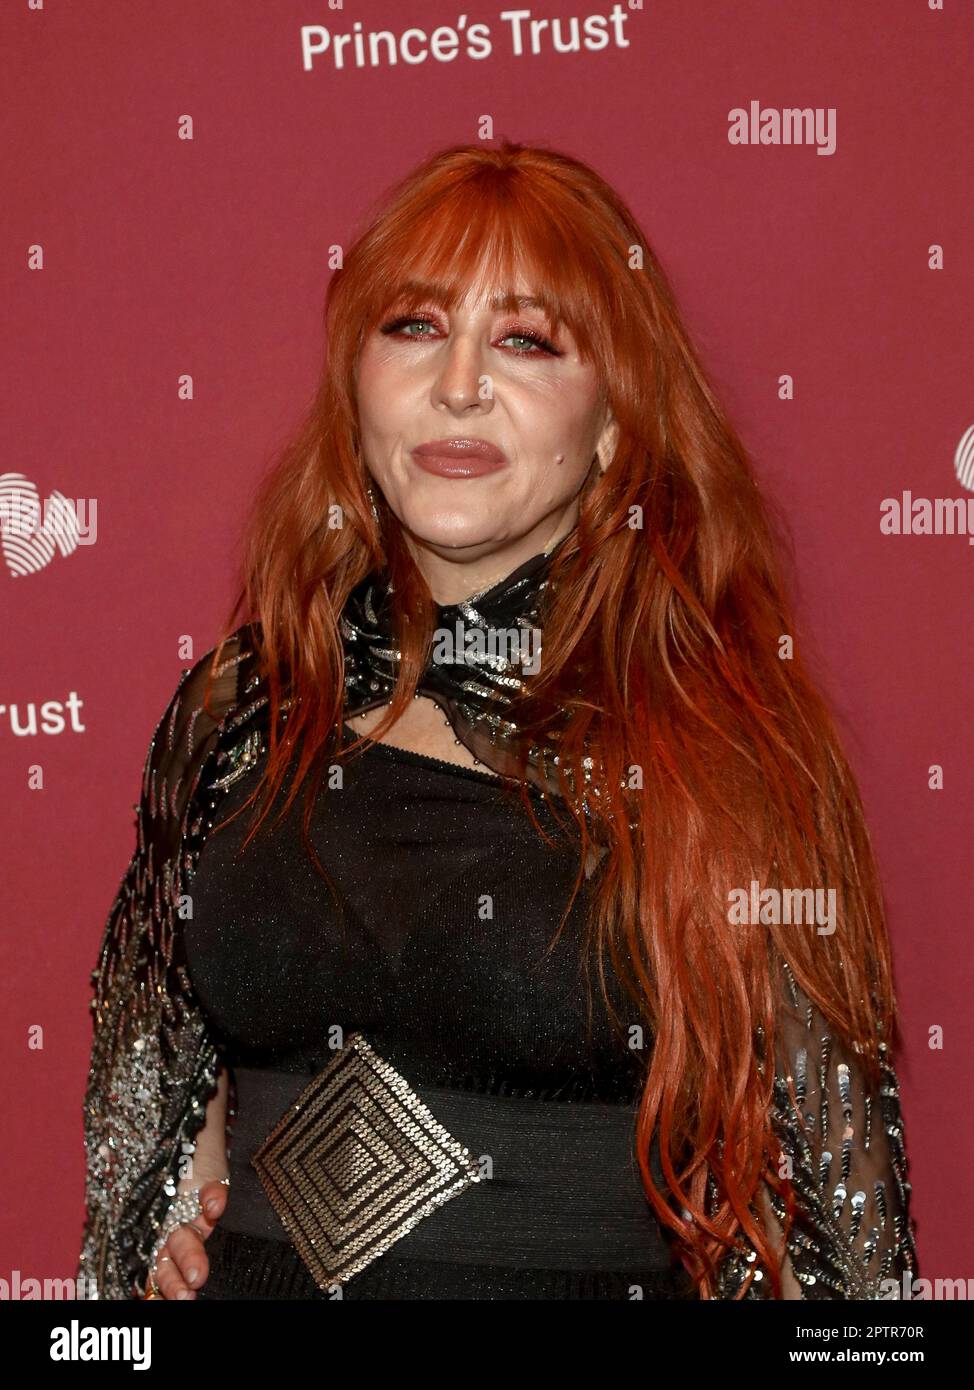 Charlotte Tilbury Shines in Sequined Cape Dress at Prince's Trust Gala